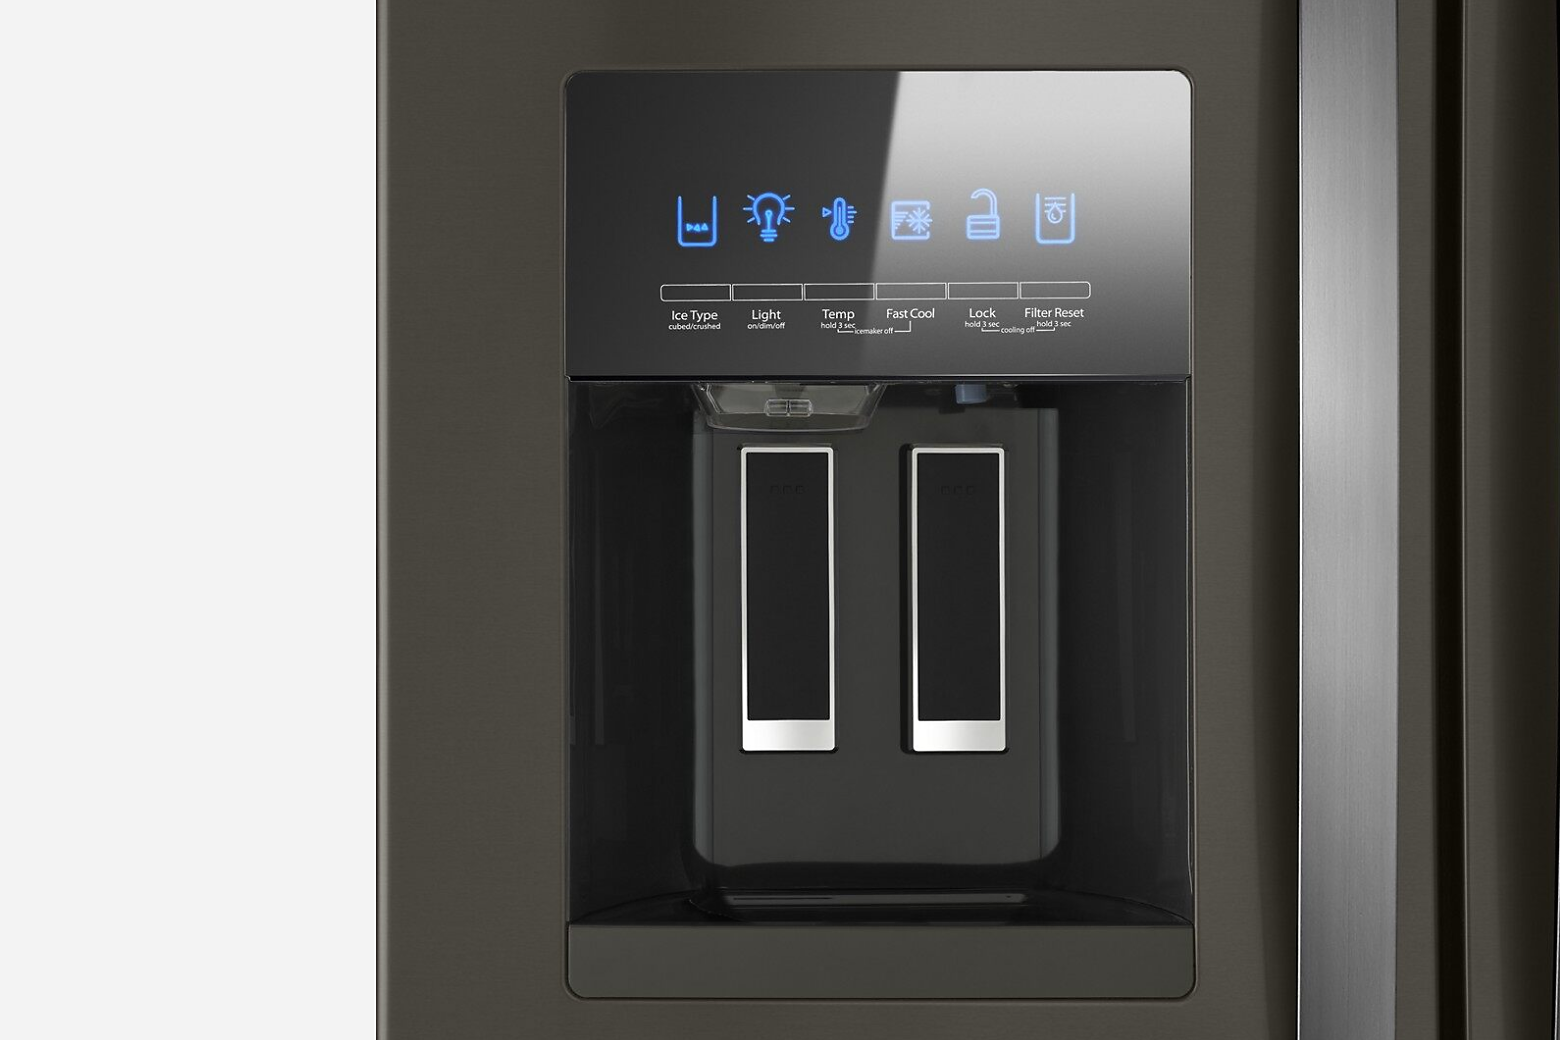 Close-up of exterior ice maker and water dispenser interface